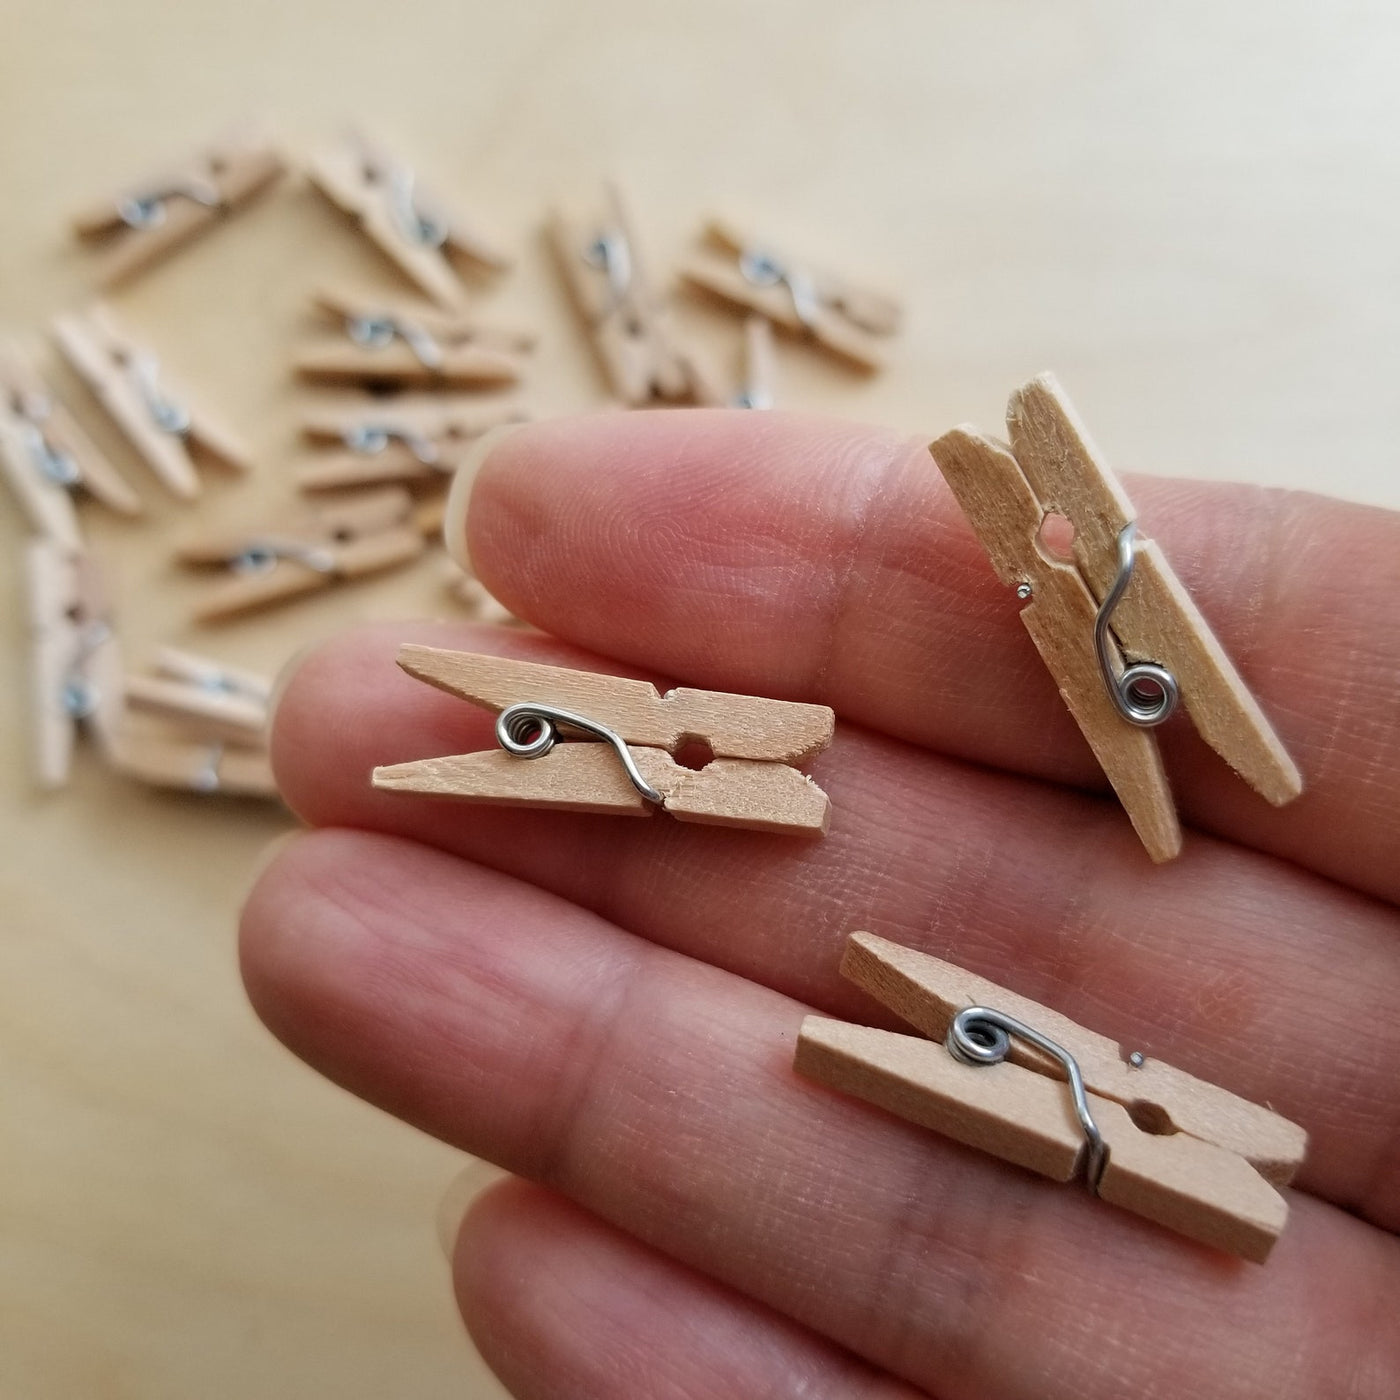 Wooden Clothespin